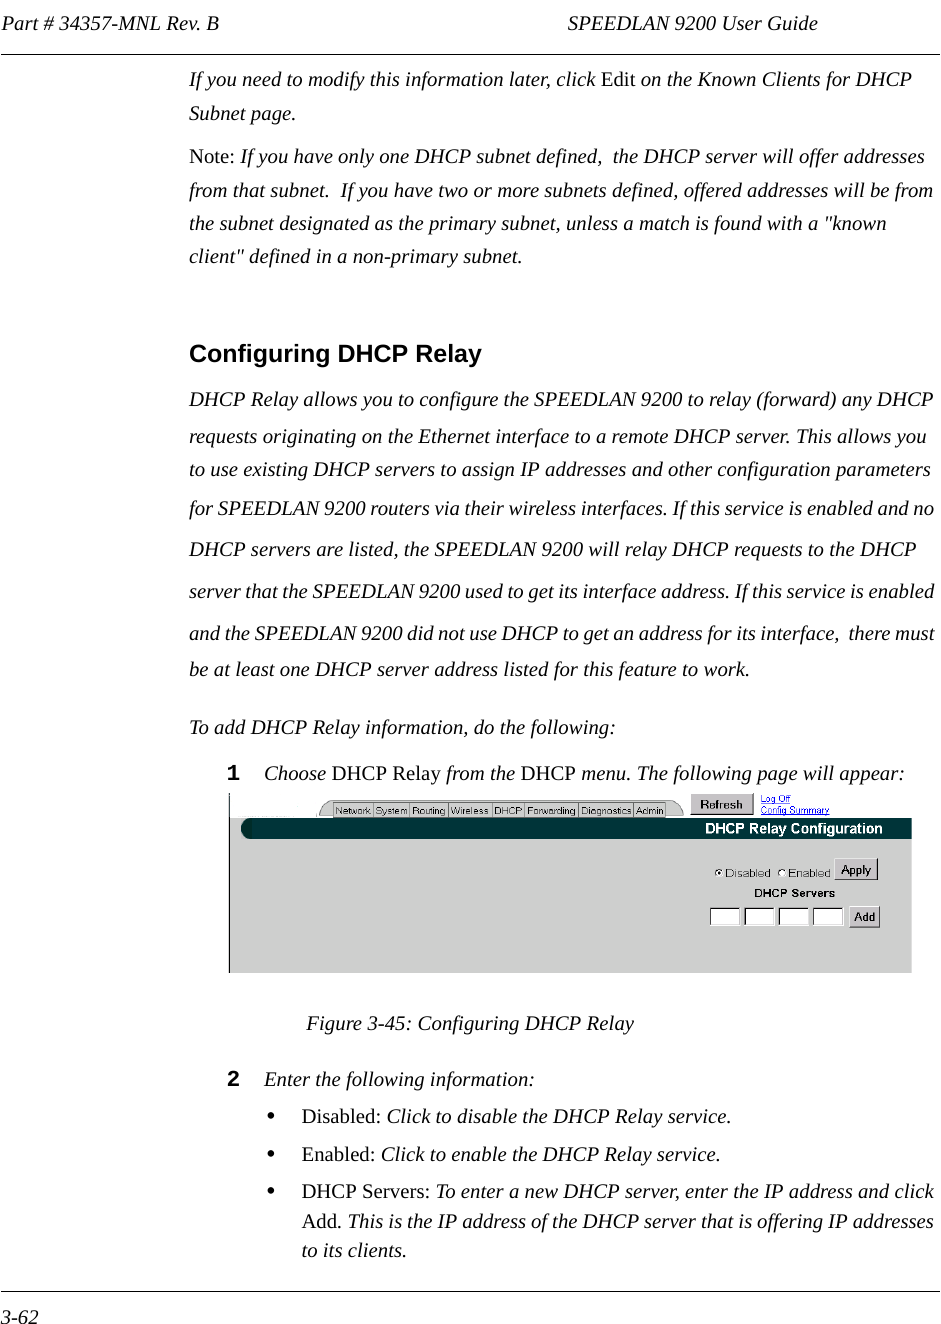 Part # 34357-MNL Rev. B                                                                   SPEEDLAN 9200 User Guide 3-62If you need to modify this information later, click Edit on the Known Clients for DHCP Subnet page.Note: If you have only one DHCP subnet defined,  the DHCP server will offer addresses from that subnet.  If you have two or more subnets defined, offered addresses will be from the subnet designated as the primary subnet, unless a match is found with a &quot;known client&quot; defined in a non-primary subnet. Configuring DHCP RelayDHCP Relay allows you to configure the SPEEDLAN 9200 to relay (forward) any DHCP requests originating on the Ethernet interface to a remote DHCP server. This allows you to use existing DHCP servers to assign IP addresses and other configuration parameters for SPEEDLAN 9200 routers via their wireless interfaces. If this service is enabled and no DHCP servers are listed, the SPEEDLAN 9200 will relay DHCP requests to the DHCP server that the SPEEDLAN 9200 used to get its interface address. If this service is enabled and the SPEEDLAN 9200 did not use DHCP to get an address for its interface,  there must be at least one DHCP server address listed for this feature to work.To add DHCP Relay information, do the following:1Choose DHCP Relay from the DHCP menu. The following page will appear:Figure 3-45: Configuring DHCP Relay2Enter the following information:•Disabled: Click to disable the DHCP Relay service.•Enabled: Click to enable the DHCP Relay service.•DHCP Servers: To enter a new DHCP server, enter the IP address and click Add. This is the IP address of the DHCP server that is offering IP addresses to its clients. 